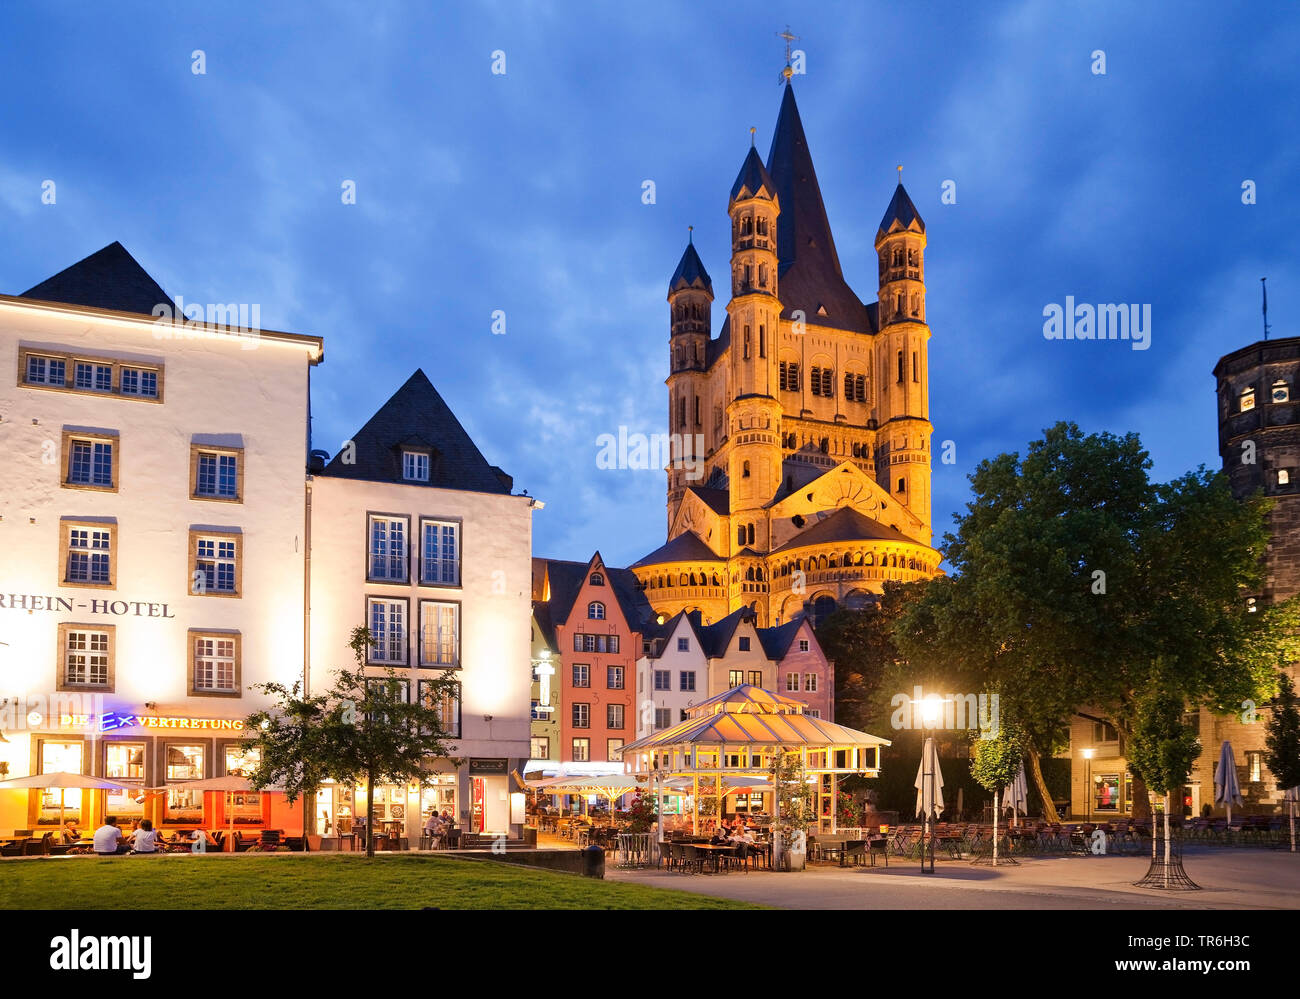 Great St. Martin Church and fish market in the evening, Germany, North Rhine-Westphalia, Cologne Stock Photo